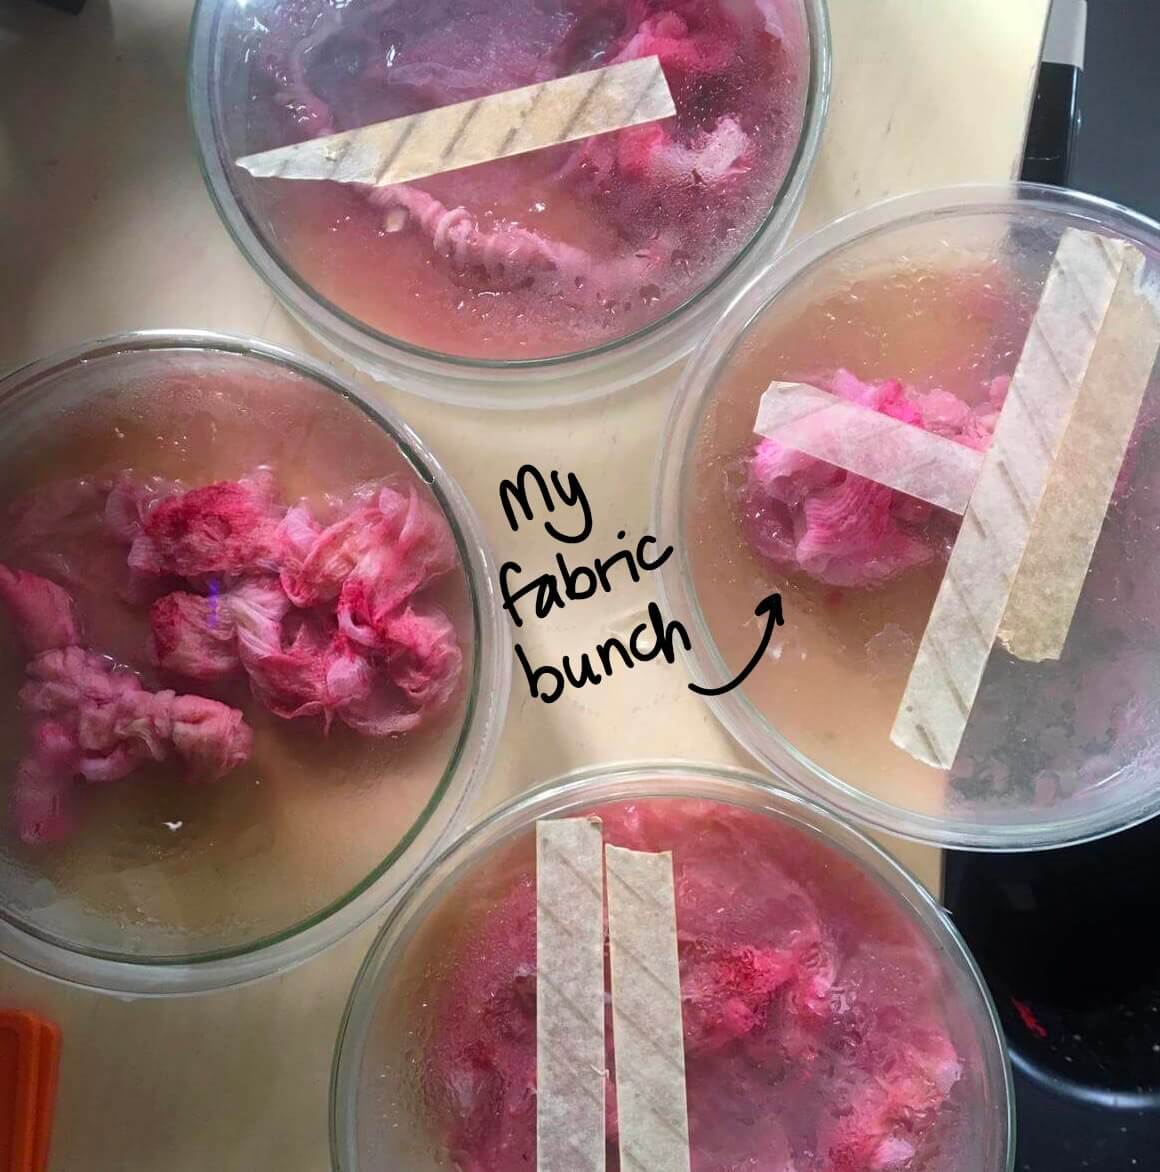 Fabric with growing bacteria